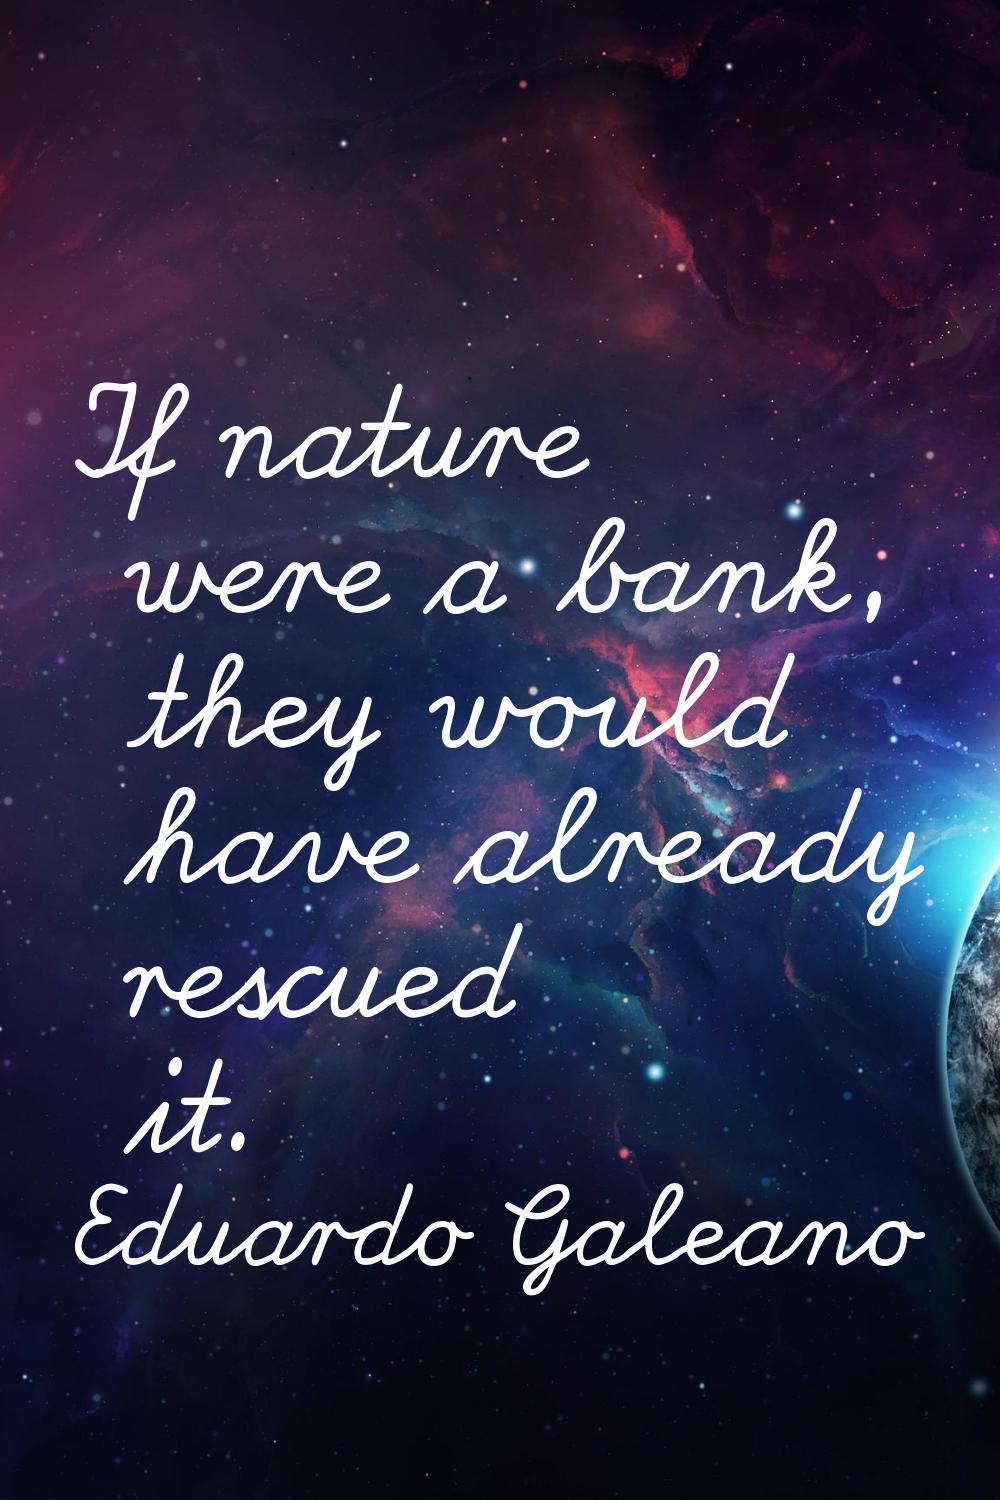 If nature were a bank, they would have already rescued it.